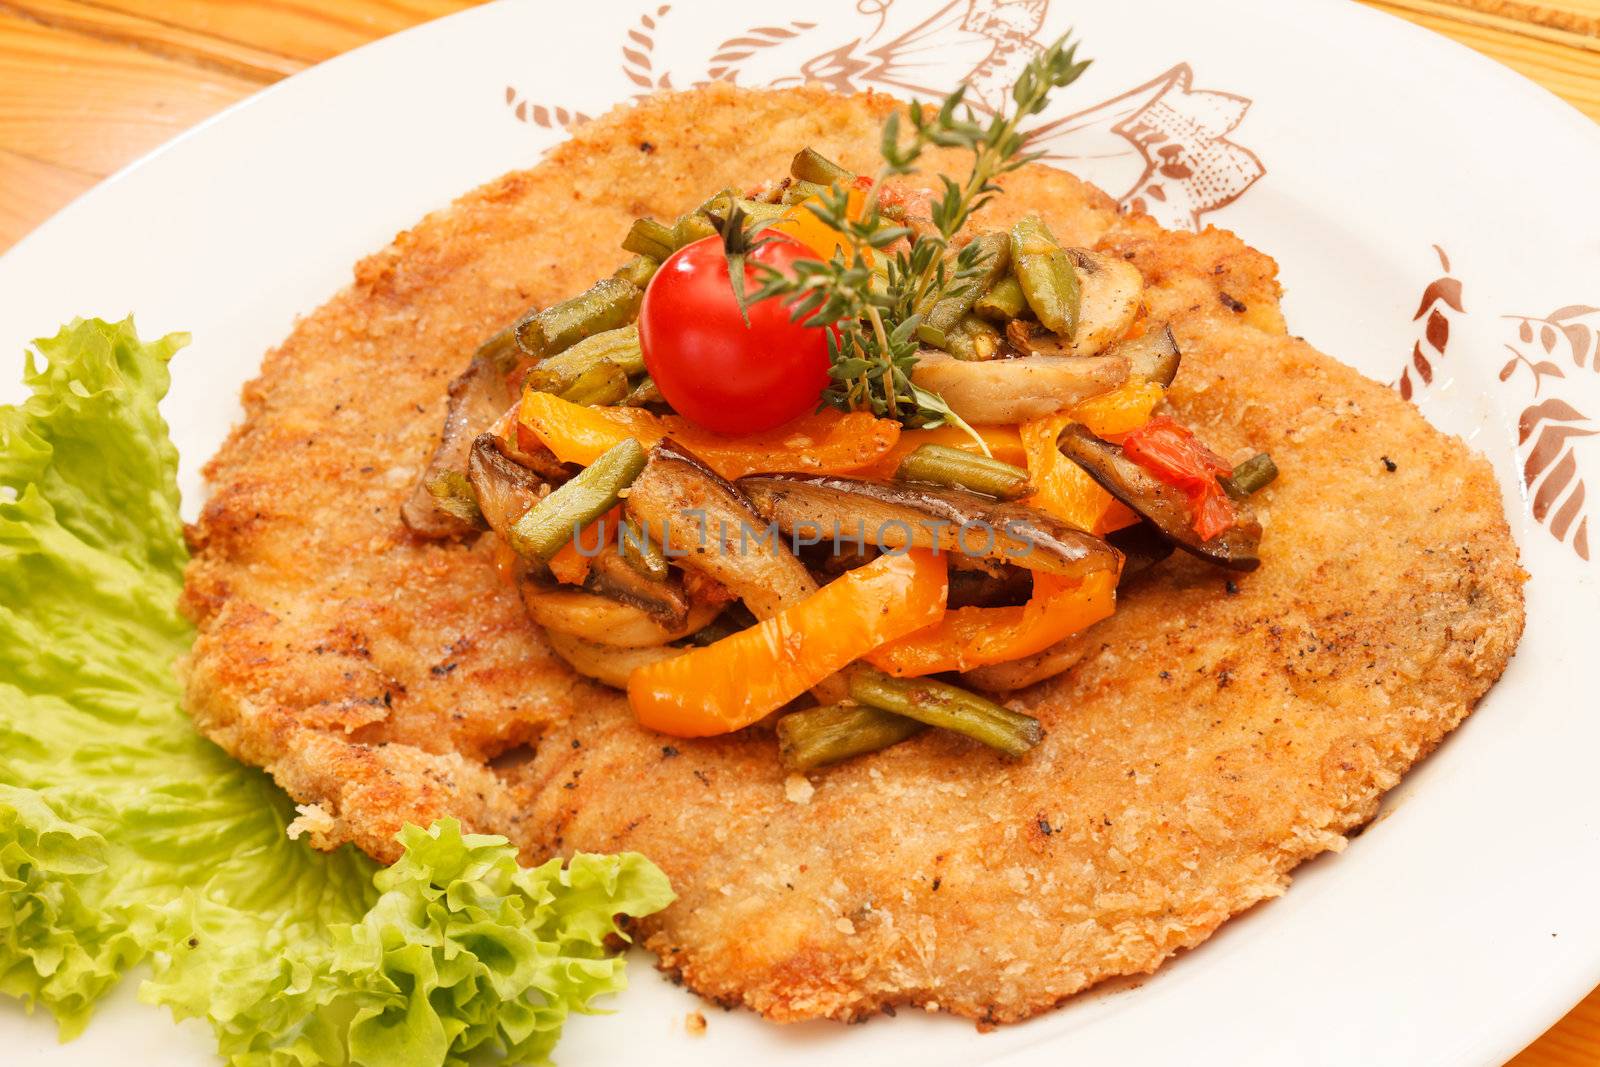 Schnitzel with vegetables by shebeko